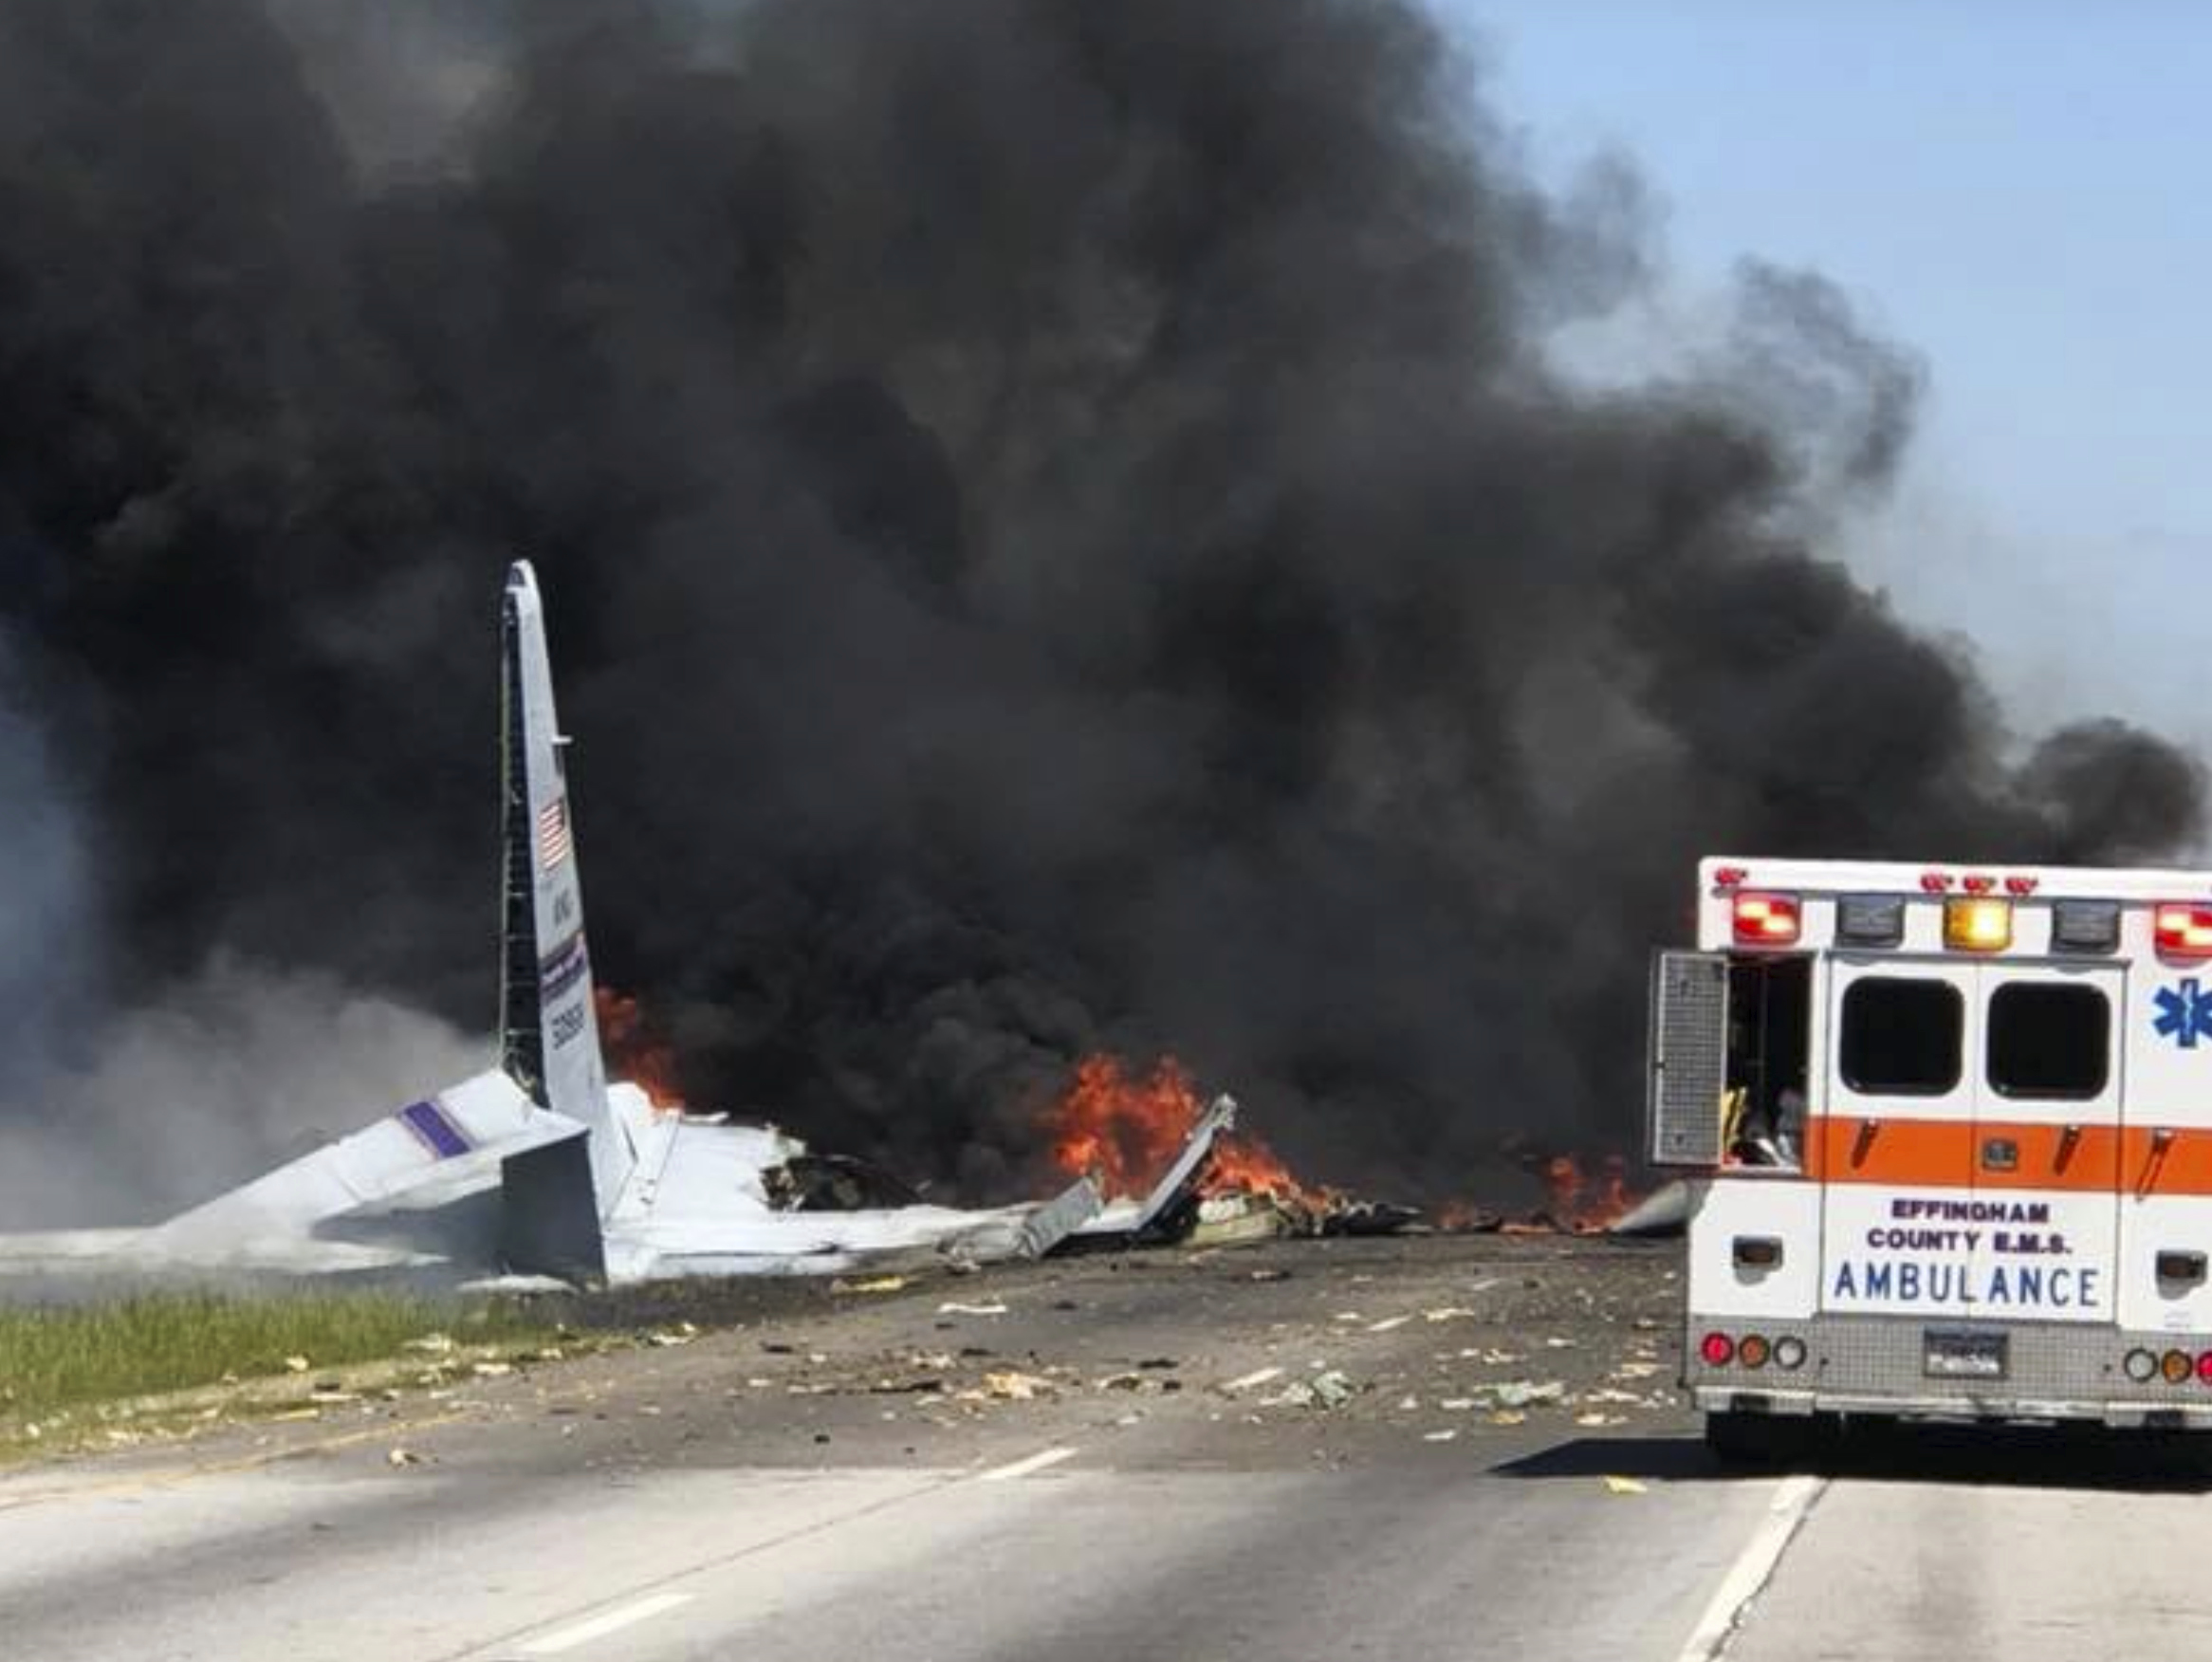 Flames and smoke rise from an Air National Guard C-130 cargo plane after it crashed near Savannah, Georgia, on Wednesday.